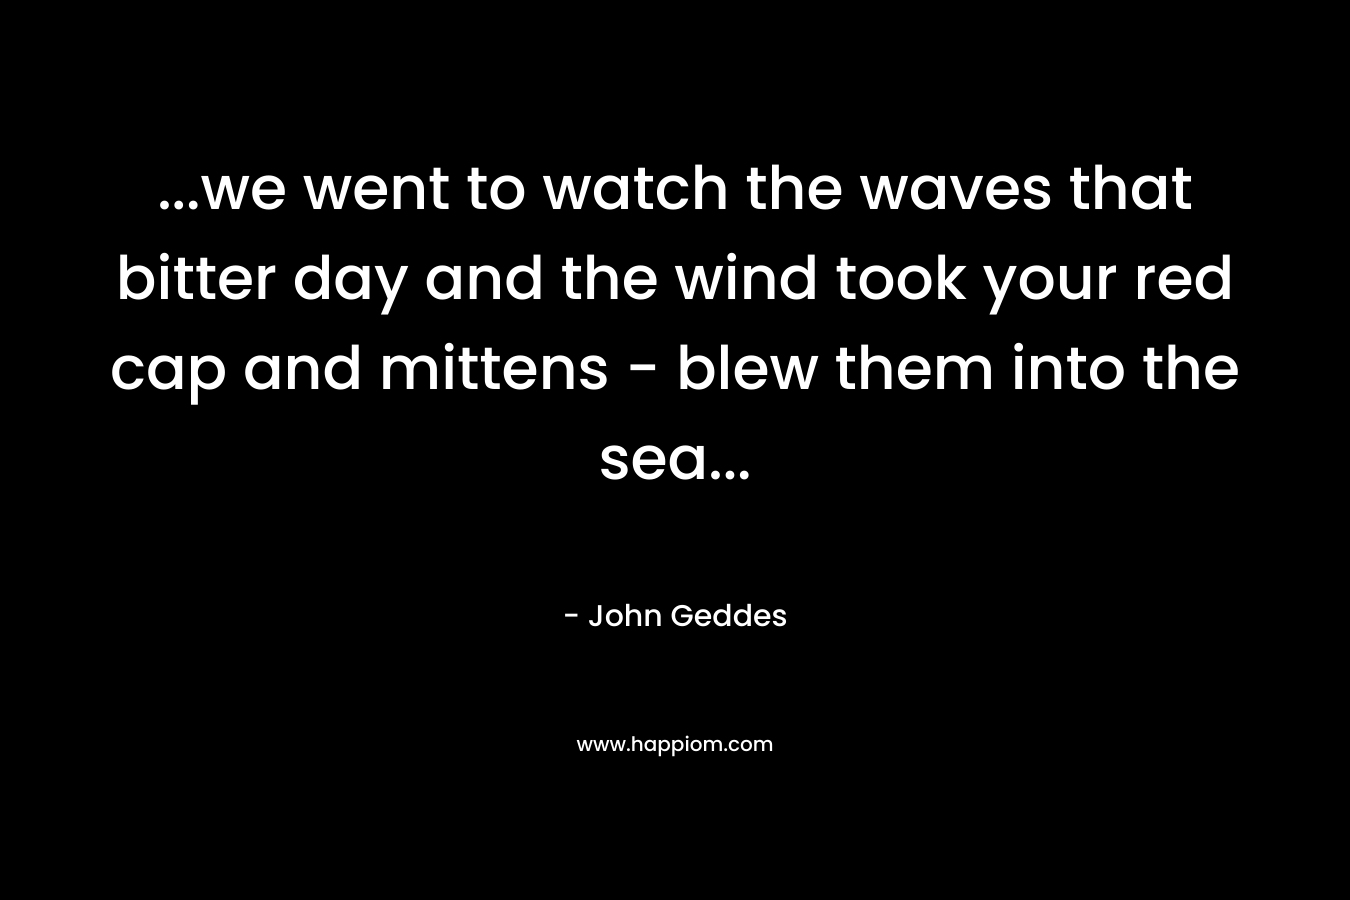 ...we went to watch the waves that bitter day and the wind took your red cap and mittens - blew them into the sea...